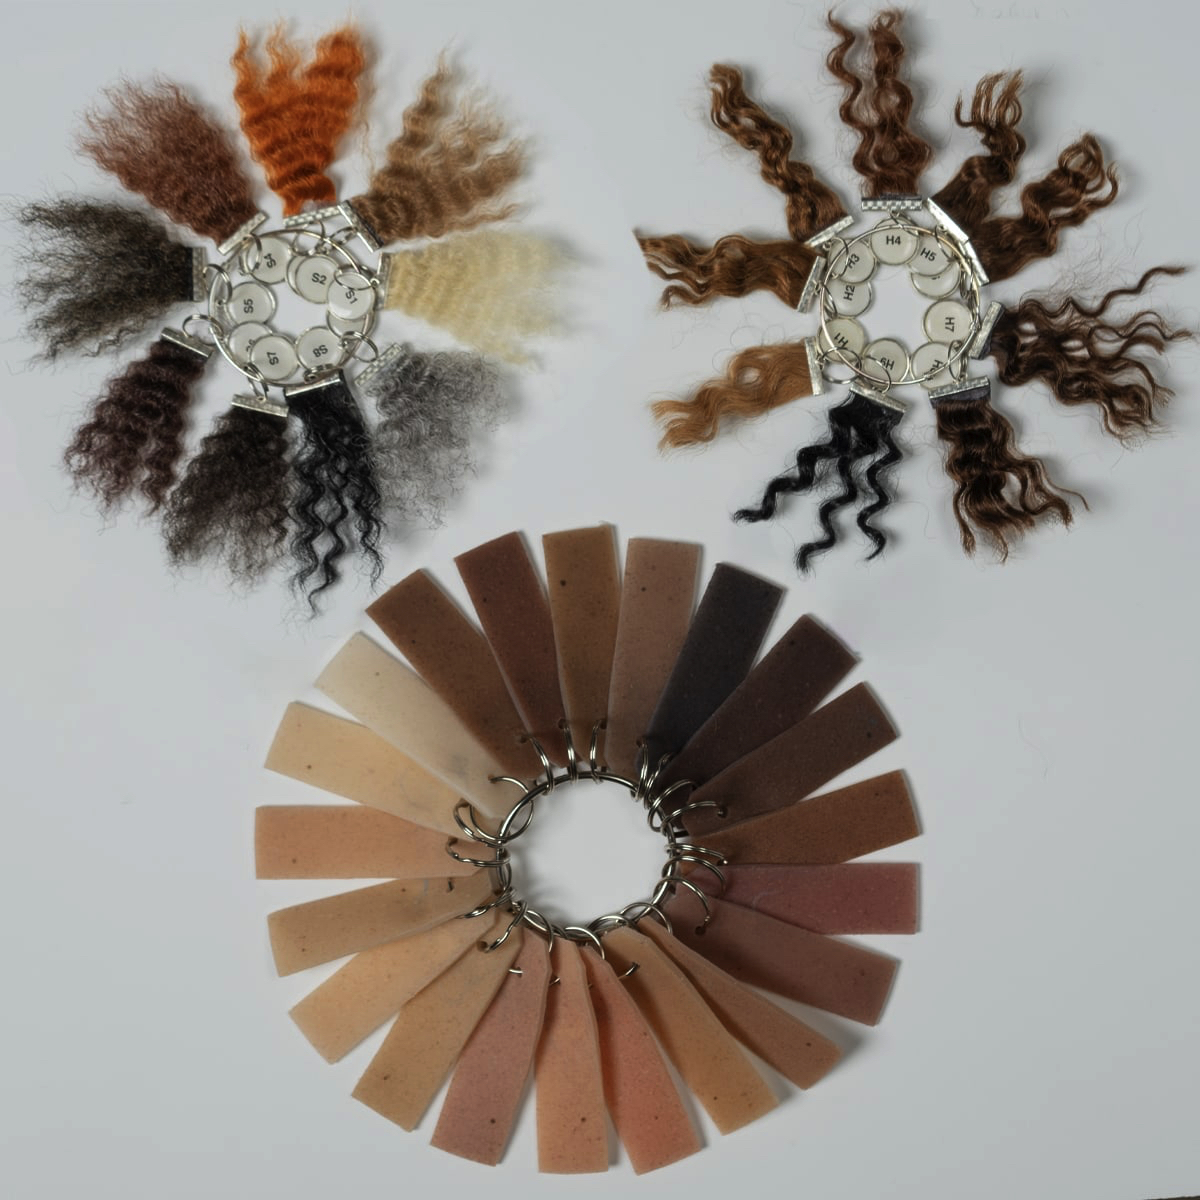  Hair and color samples laid out in circle 